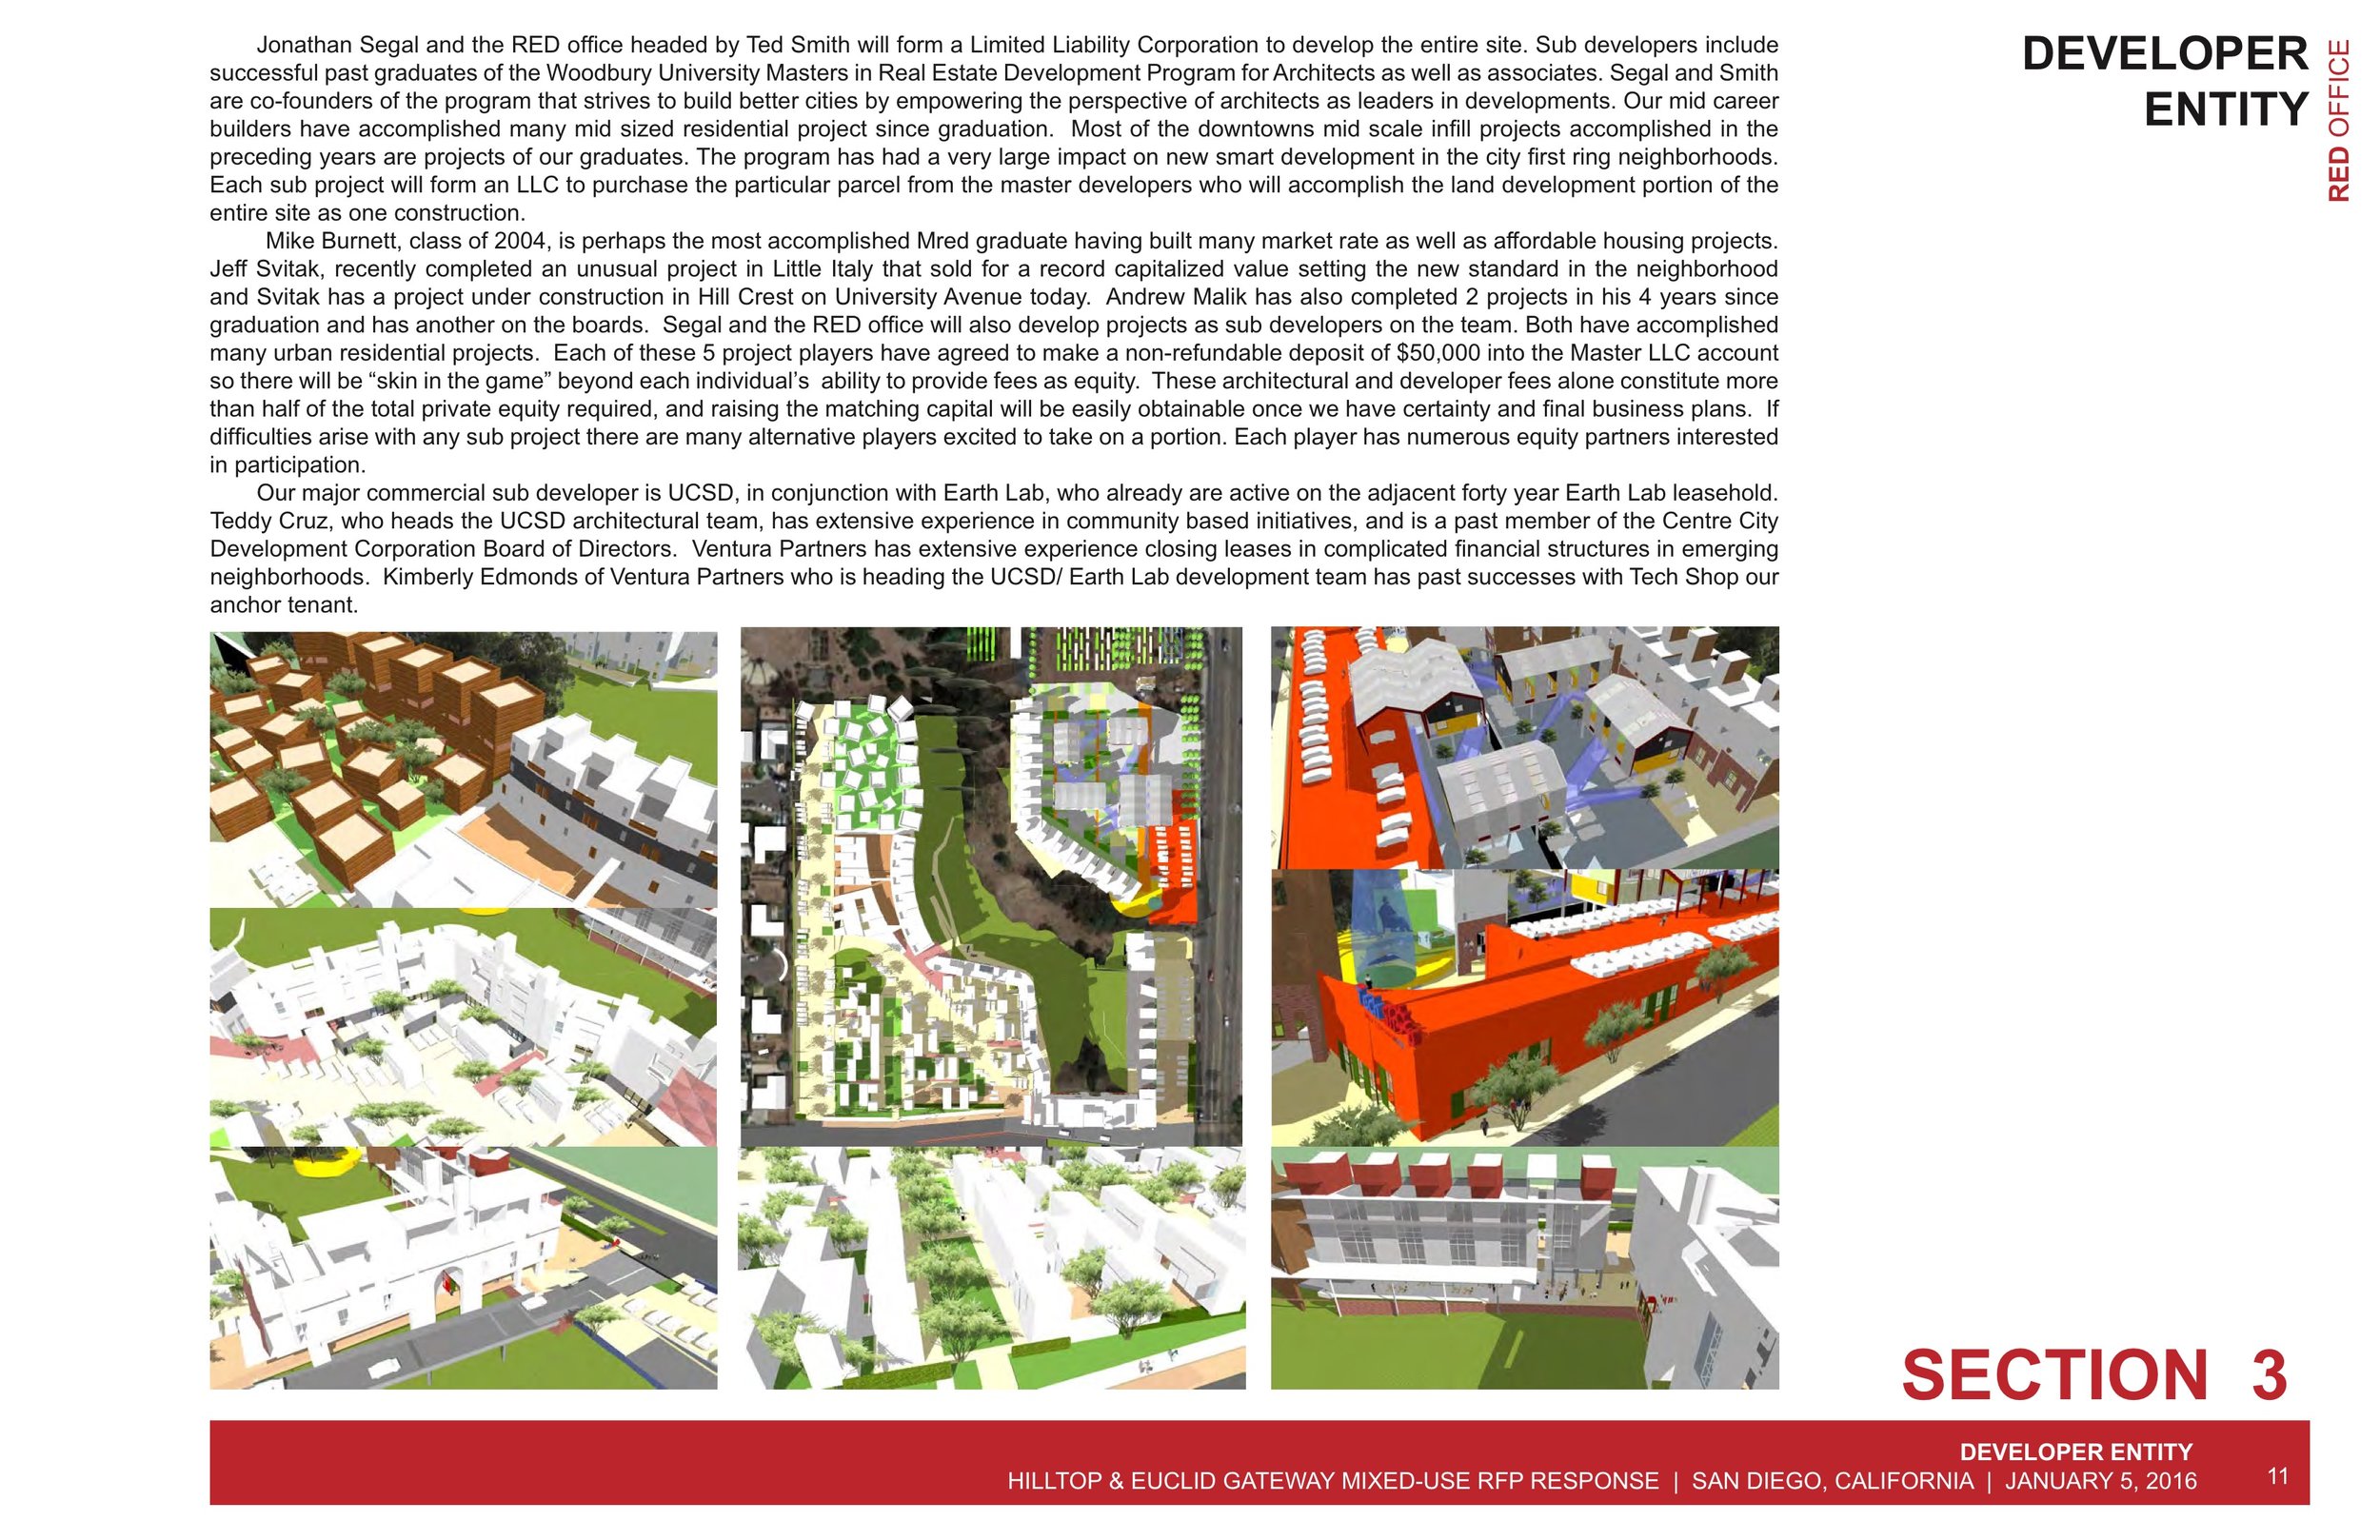 HILLTOP&EUCLID%%RFP_FINAL%%RED_OFFICE_01_11_16_compressed spread 11.jpeg